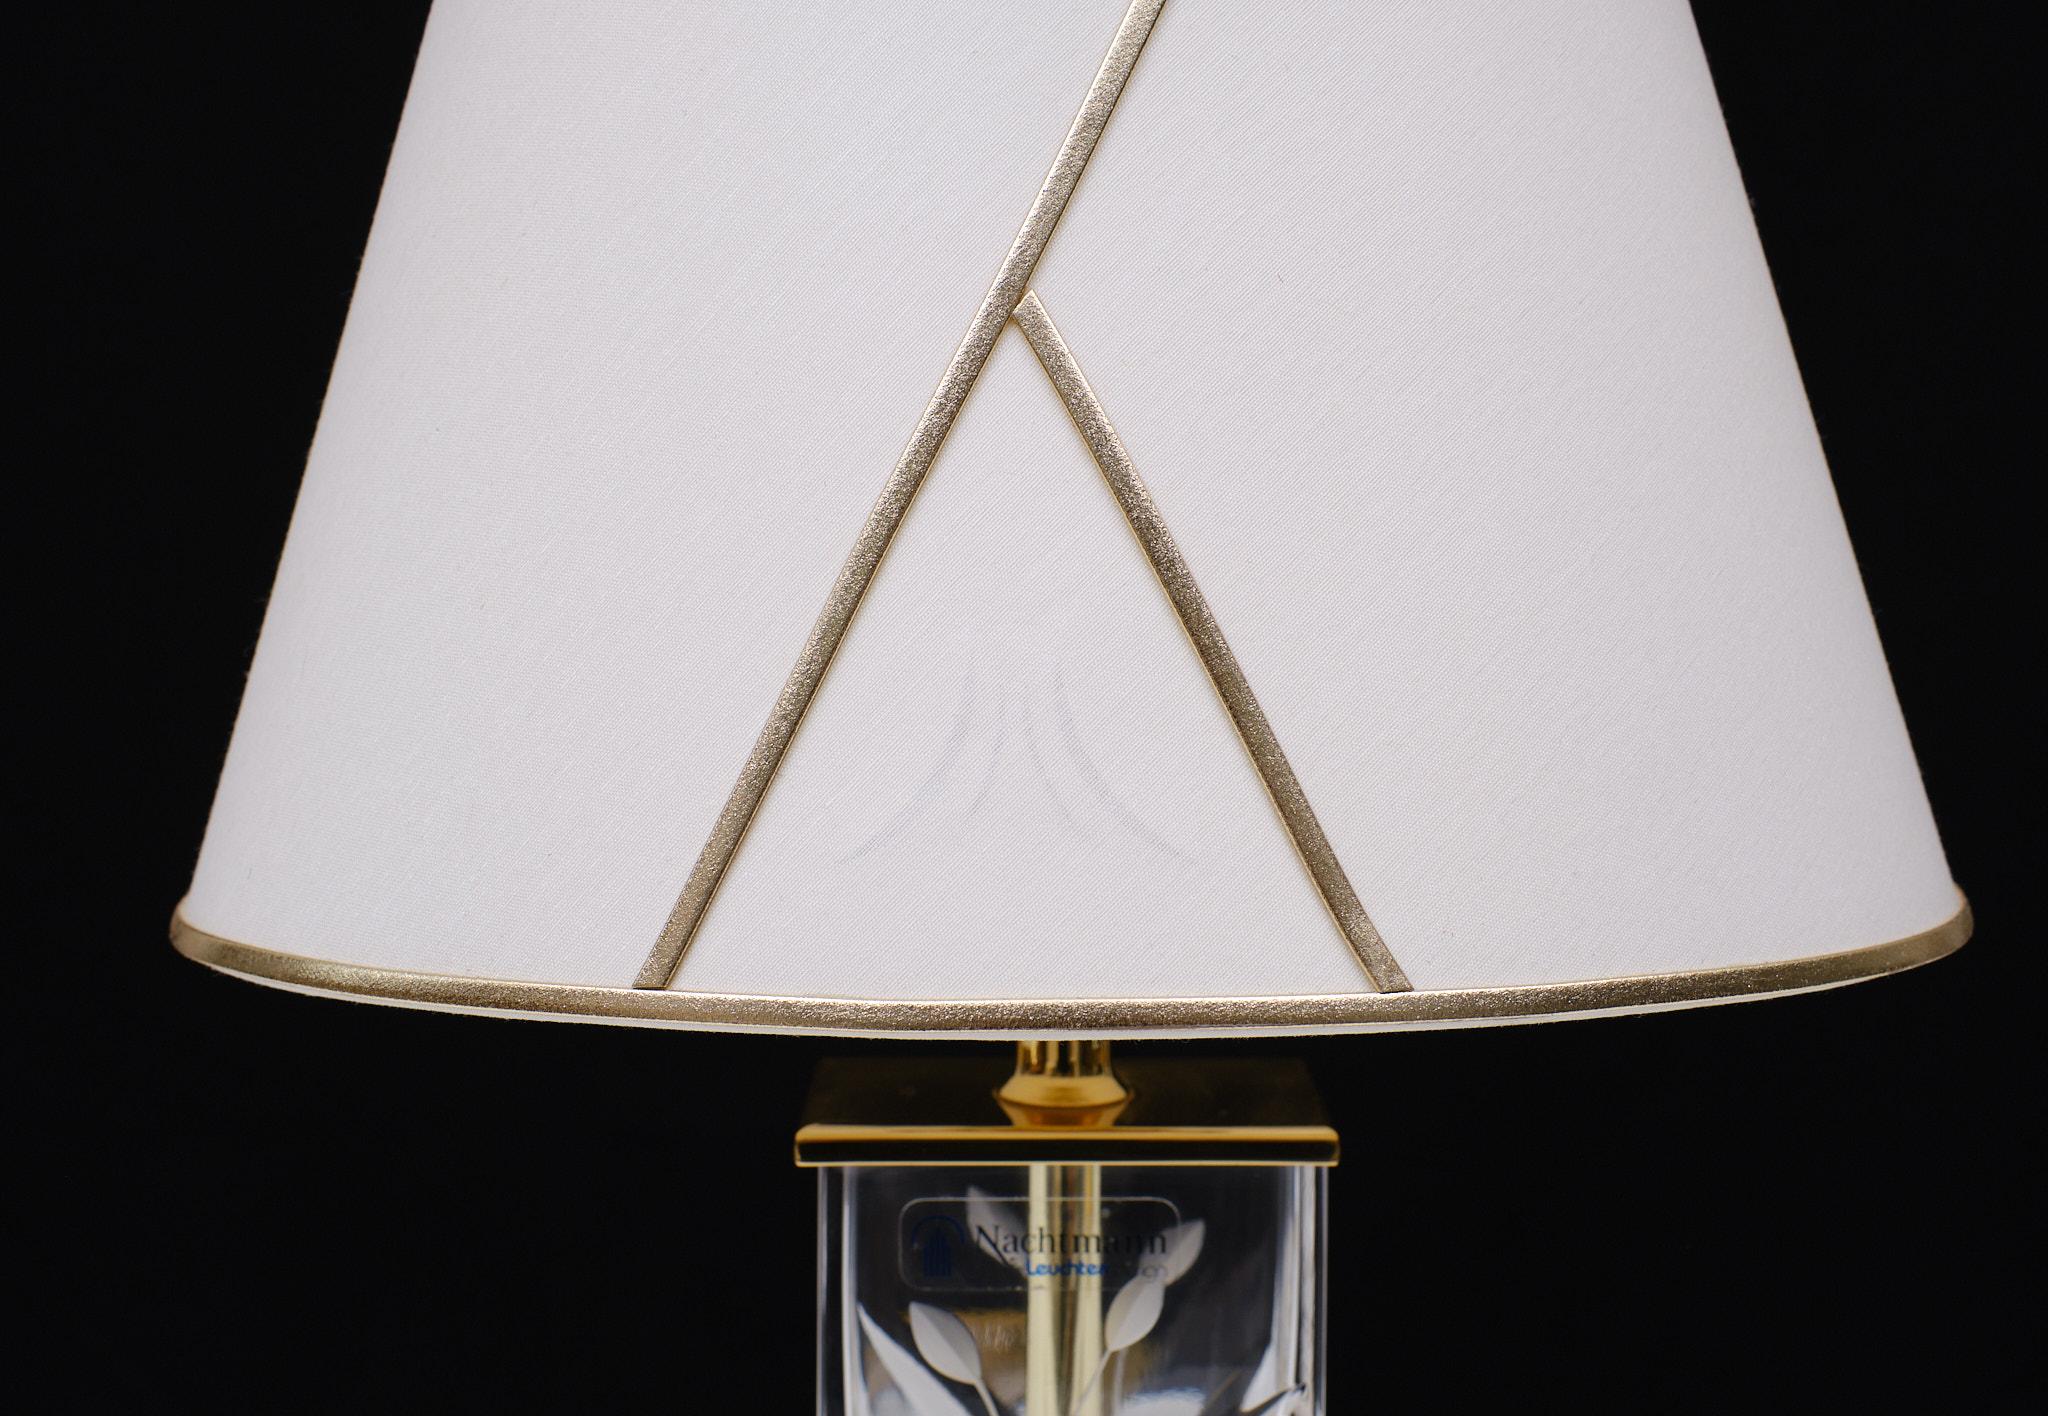 Nachtmann Leuchten  table lamp Hollywood regency  1978 Germany  In Good Condition For Sale In Den Haag, NL